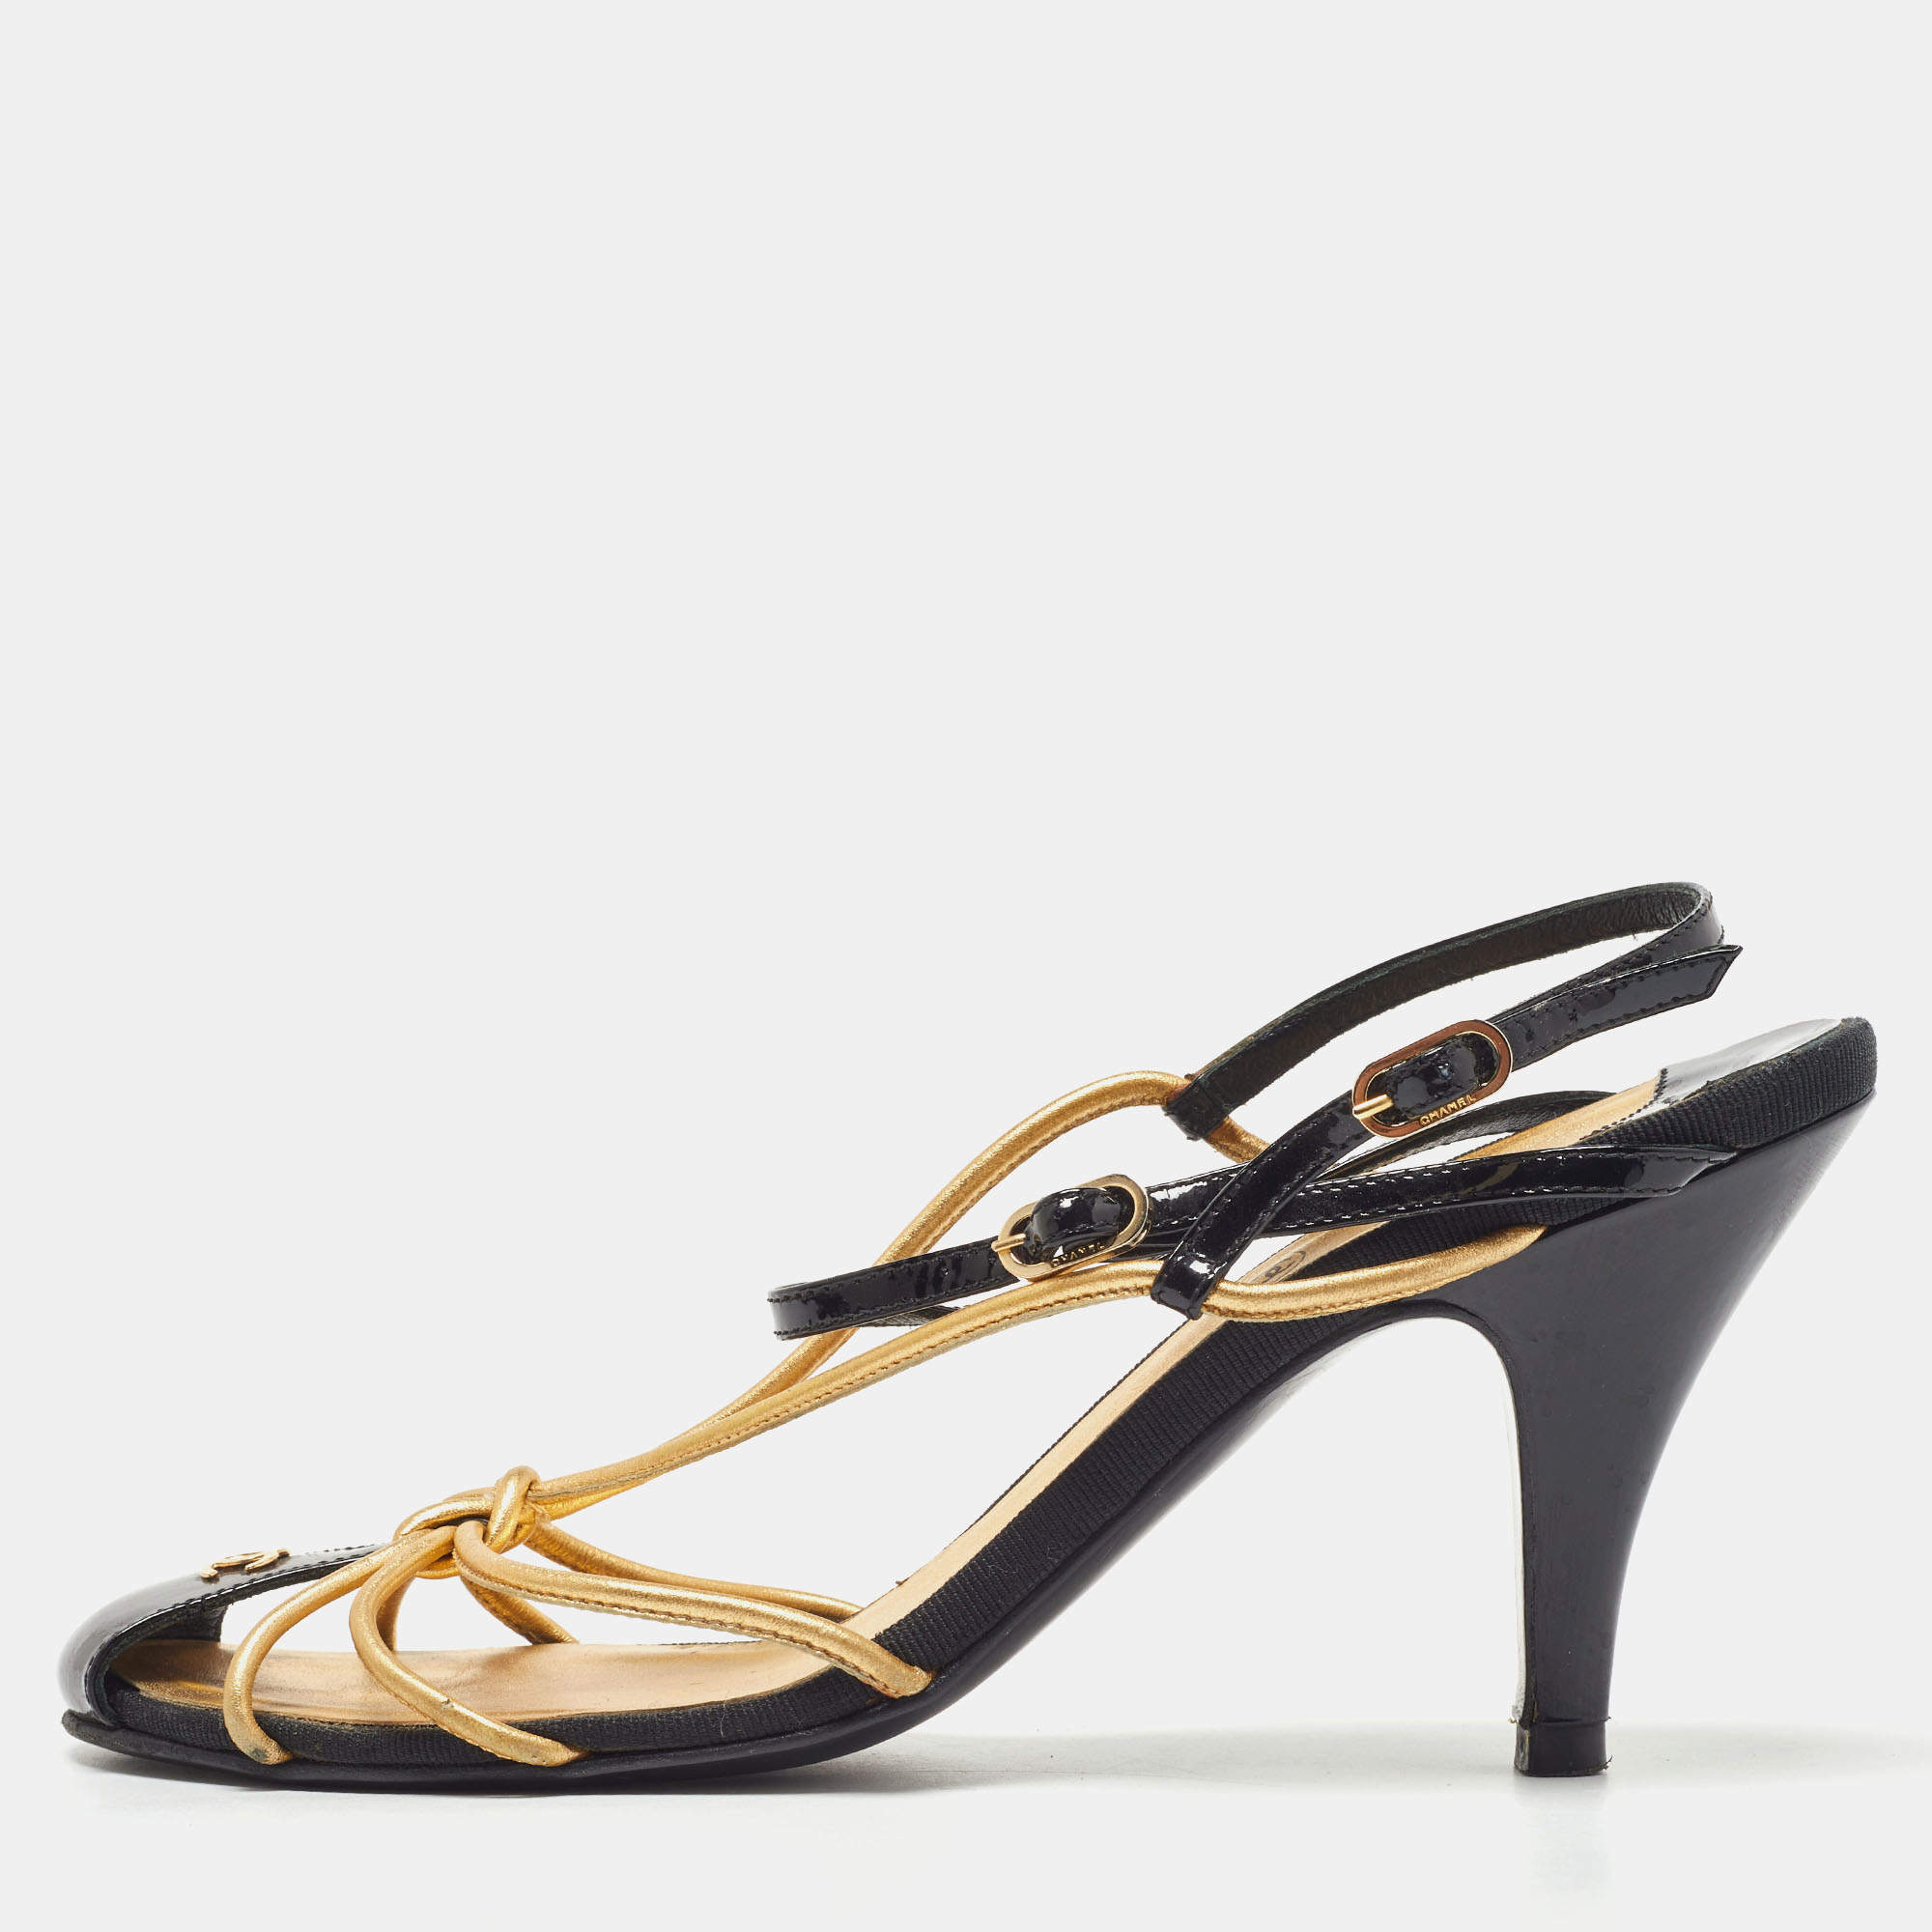 Chanel Gold/Black Leather and Patent CC Ankle Strap Sandals Size 38.5